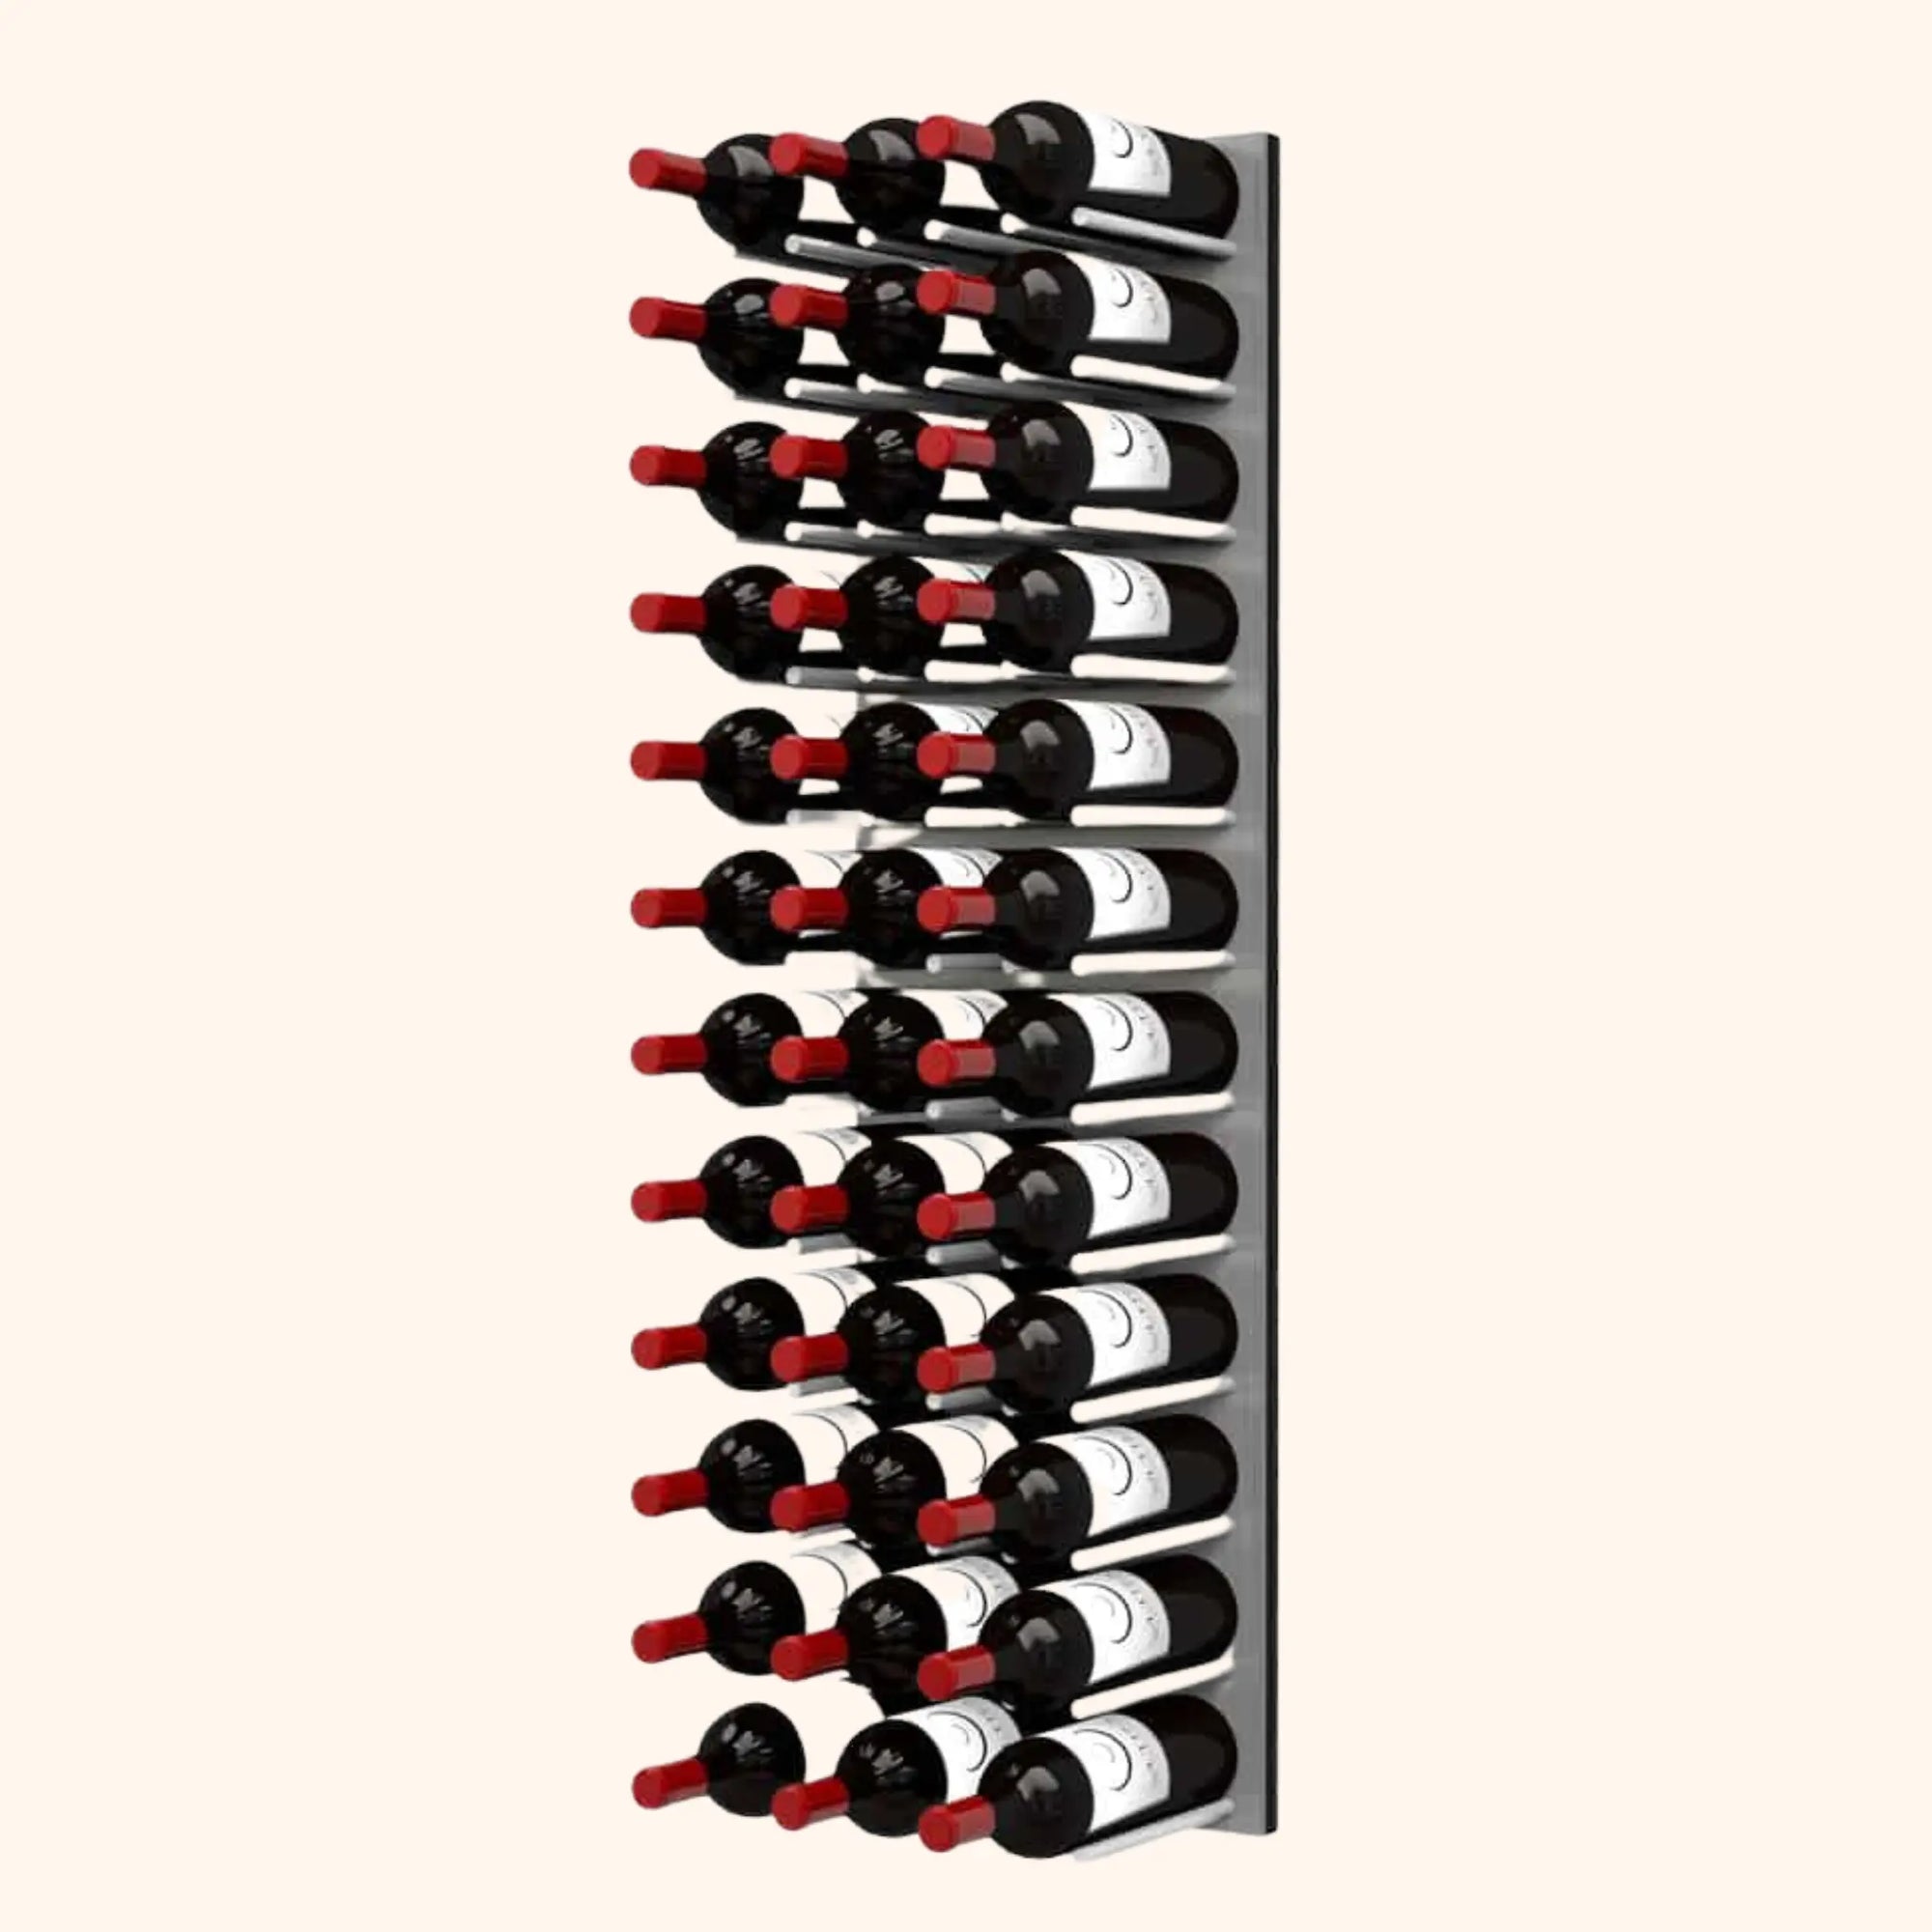 Ultra Wine Racks & Cellars | Fusion ST Cork-Out Wine Wall Alumasteel (4 Foot) Ultra Wine Racks & Cellars